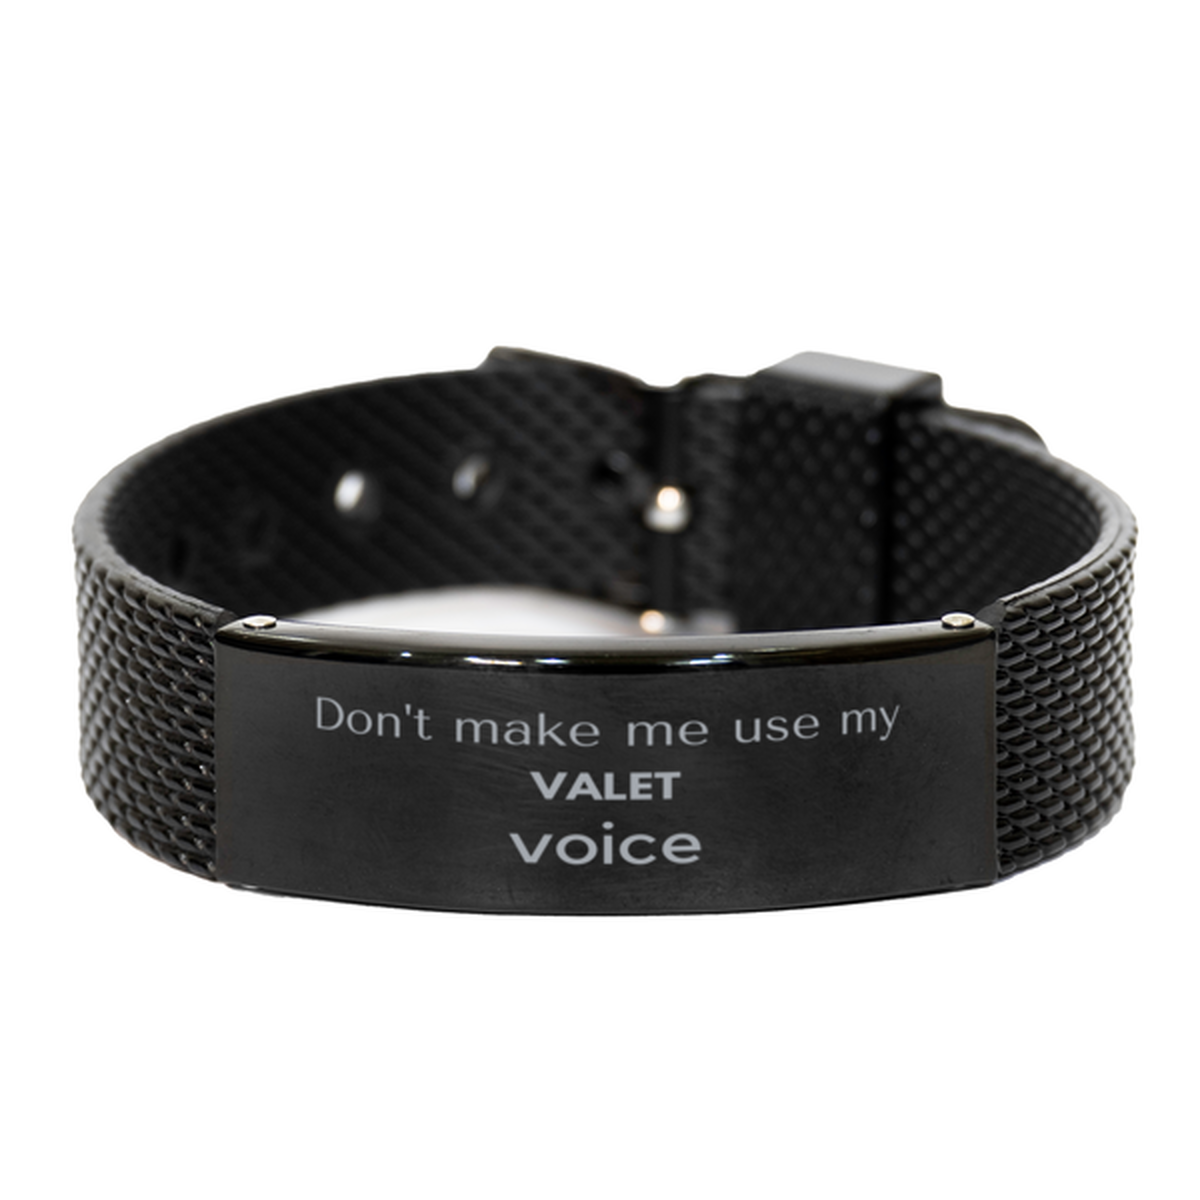 Don't make me use my Valet voice, Sarcasm Valet Gifts, Christmas Valet Black Shark Mesh Bracelet Birthday Unique Gifts For Valet Coworkers, Men, Women, Colleague, Friends